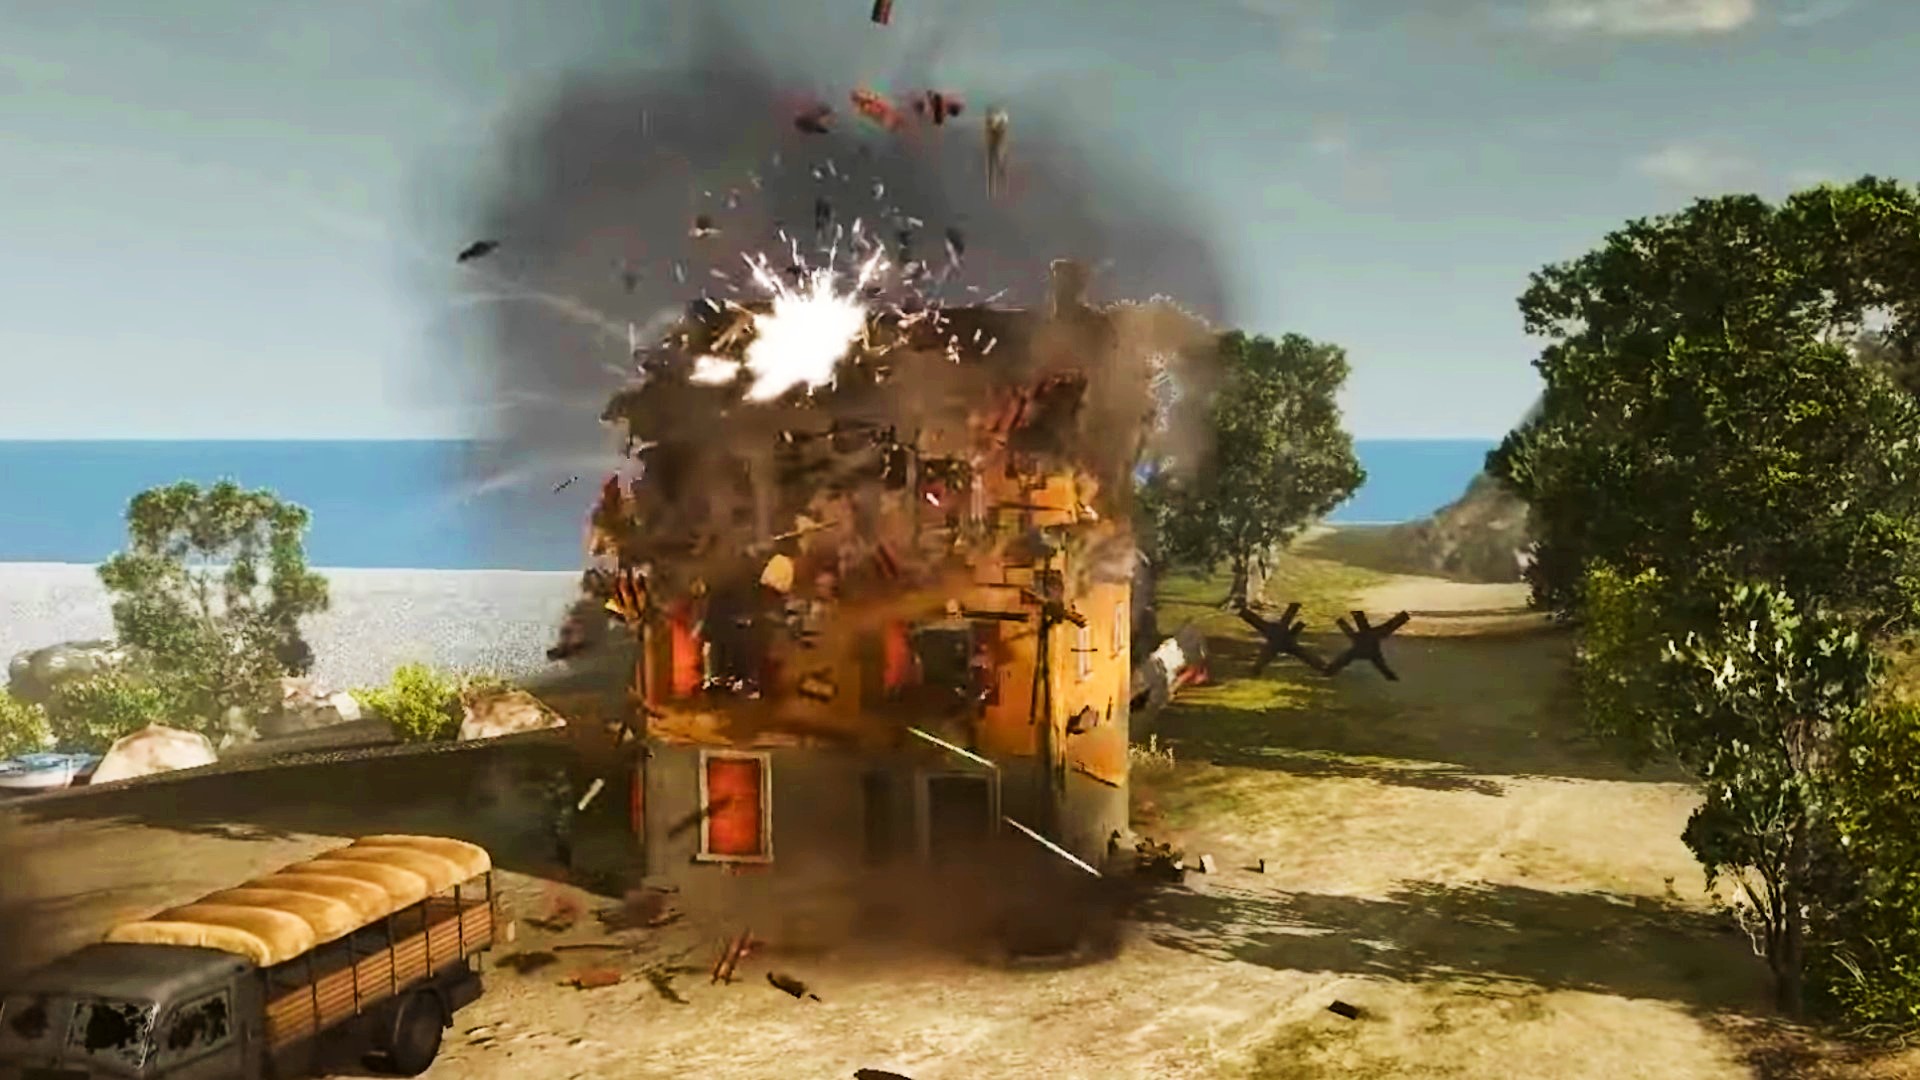 Watch Company of Heroes 3 smash a bunch of helpless buildings to smithereens